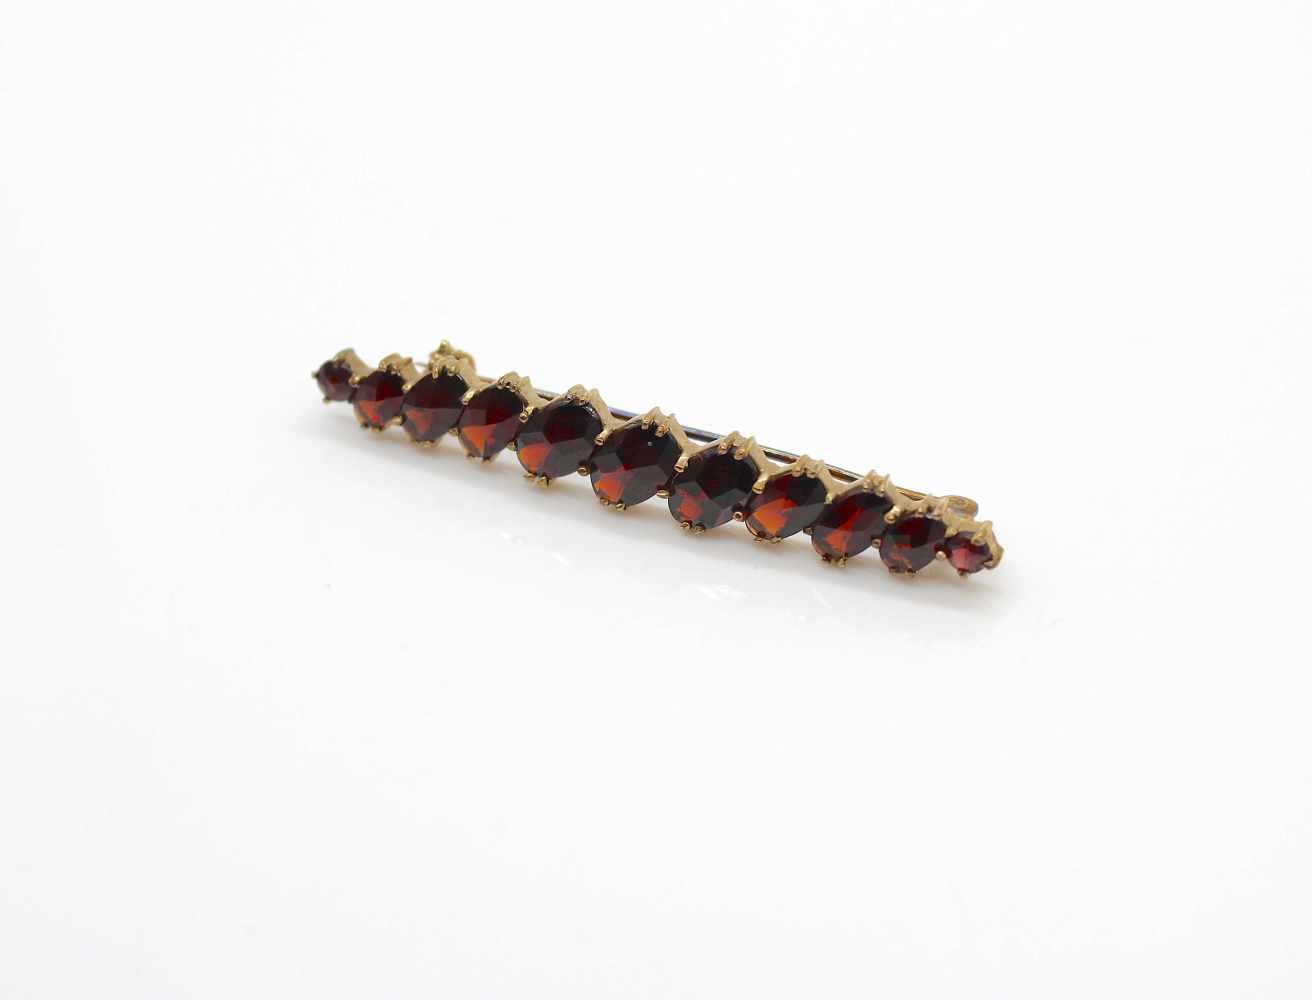 Needle in 333 gold with garnet.Weight 4 g, length 52 mm- - -15.00 % buyer's premium on the hammer - Image 2 of 2